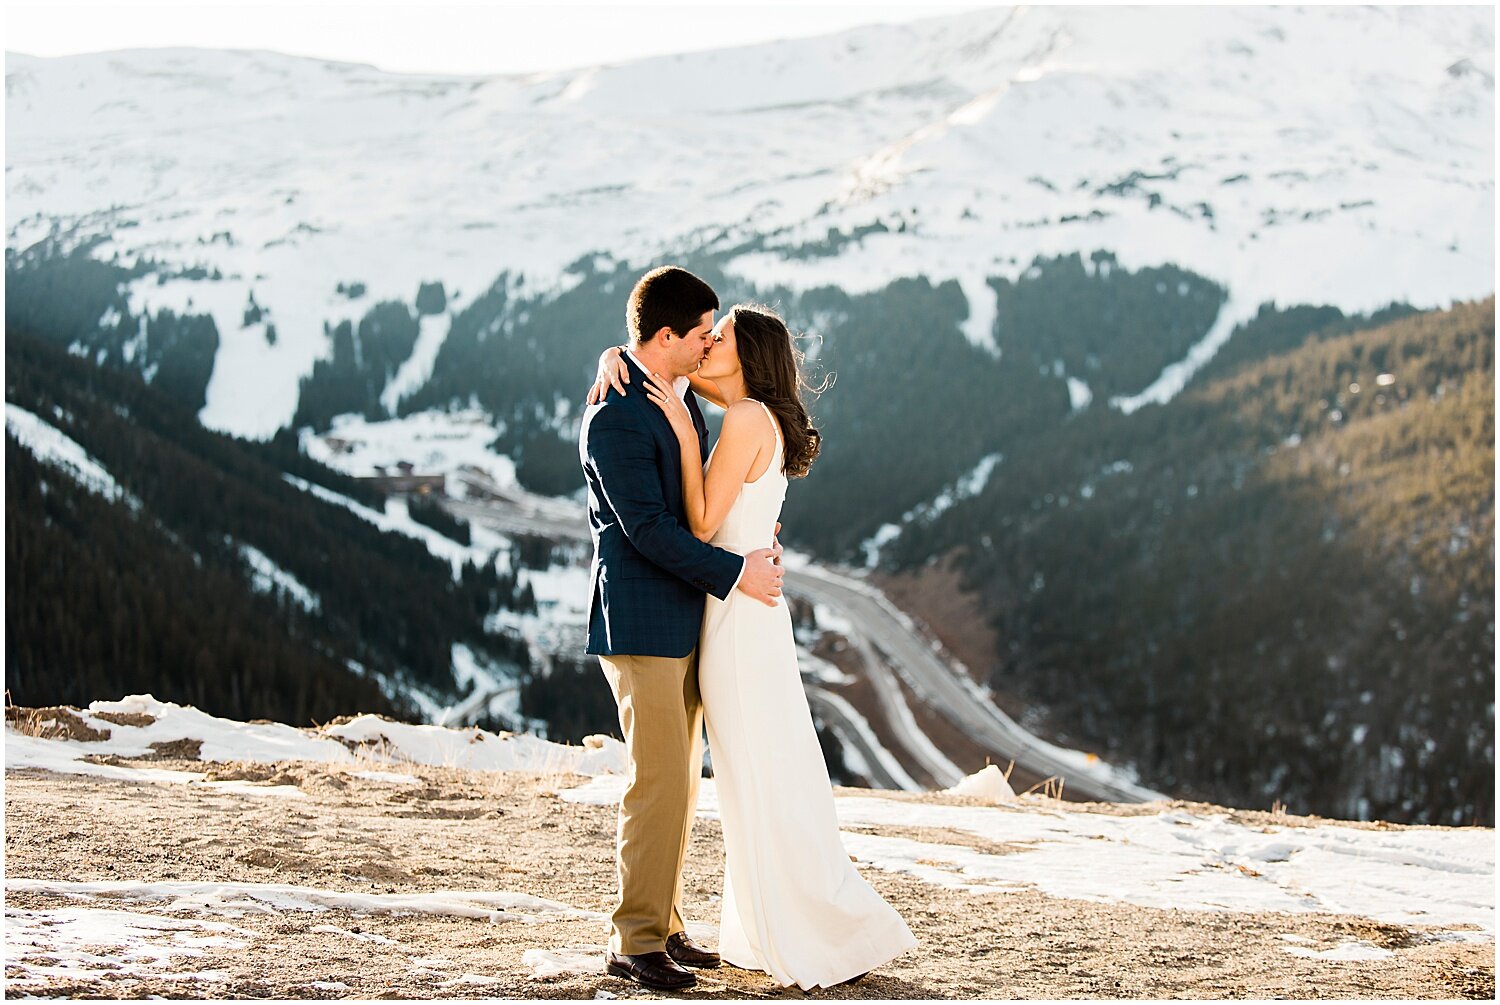 Continental-Divide-Engagement-Photography-Dillon-Colorado-Photographer-Winter-Engaged-06.jpg